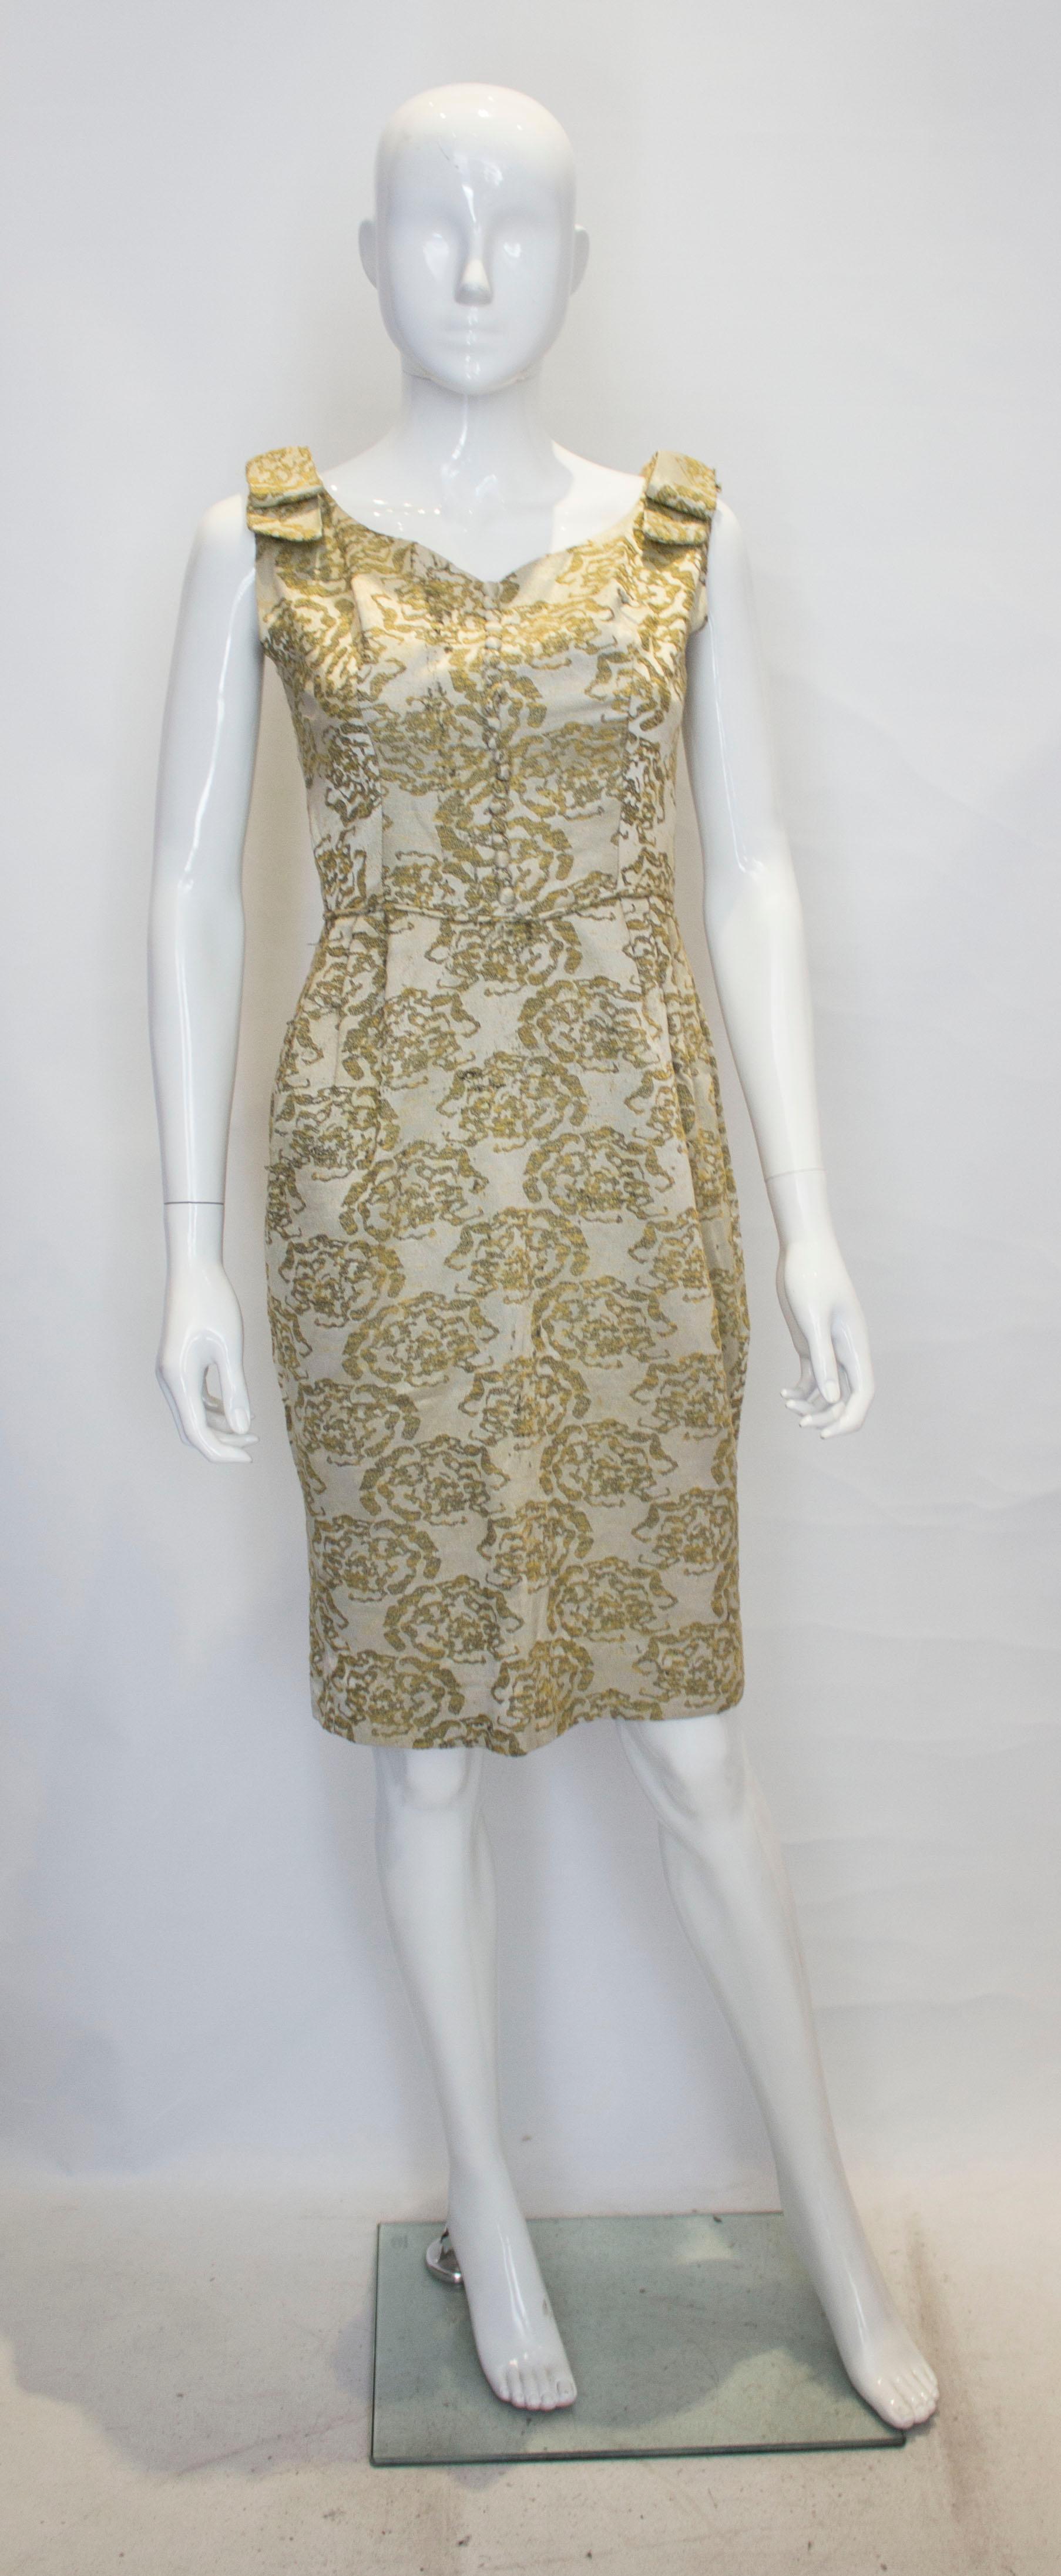 A vintage 1950s - 1960s olive green & gold brocade cinch wiggle cocktail dress 

with matching decrative button up the front 

zip up the back 

measurements taken flat in inches 

bust - 16
waist - 13
length - 38